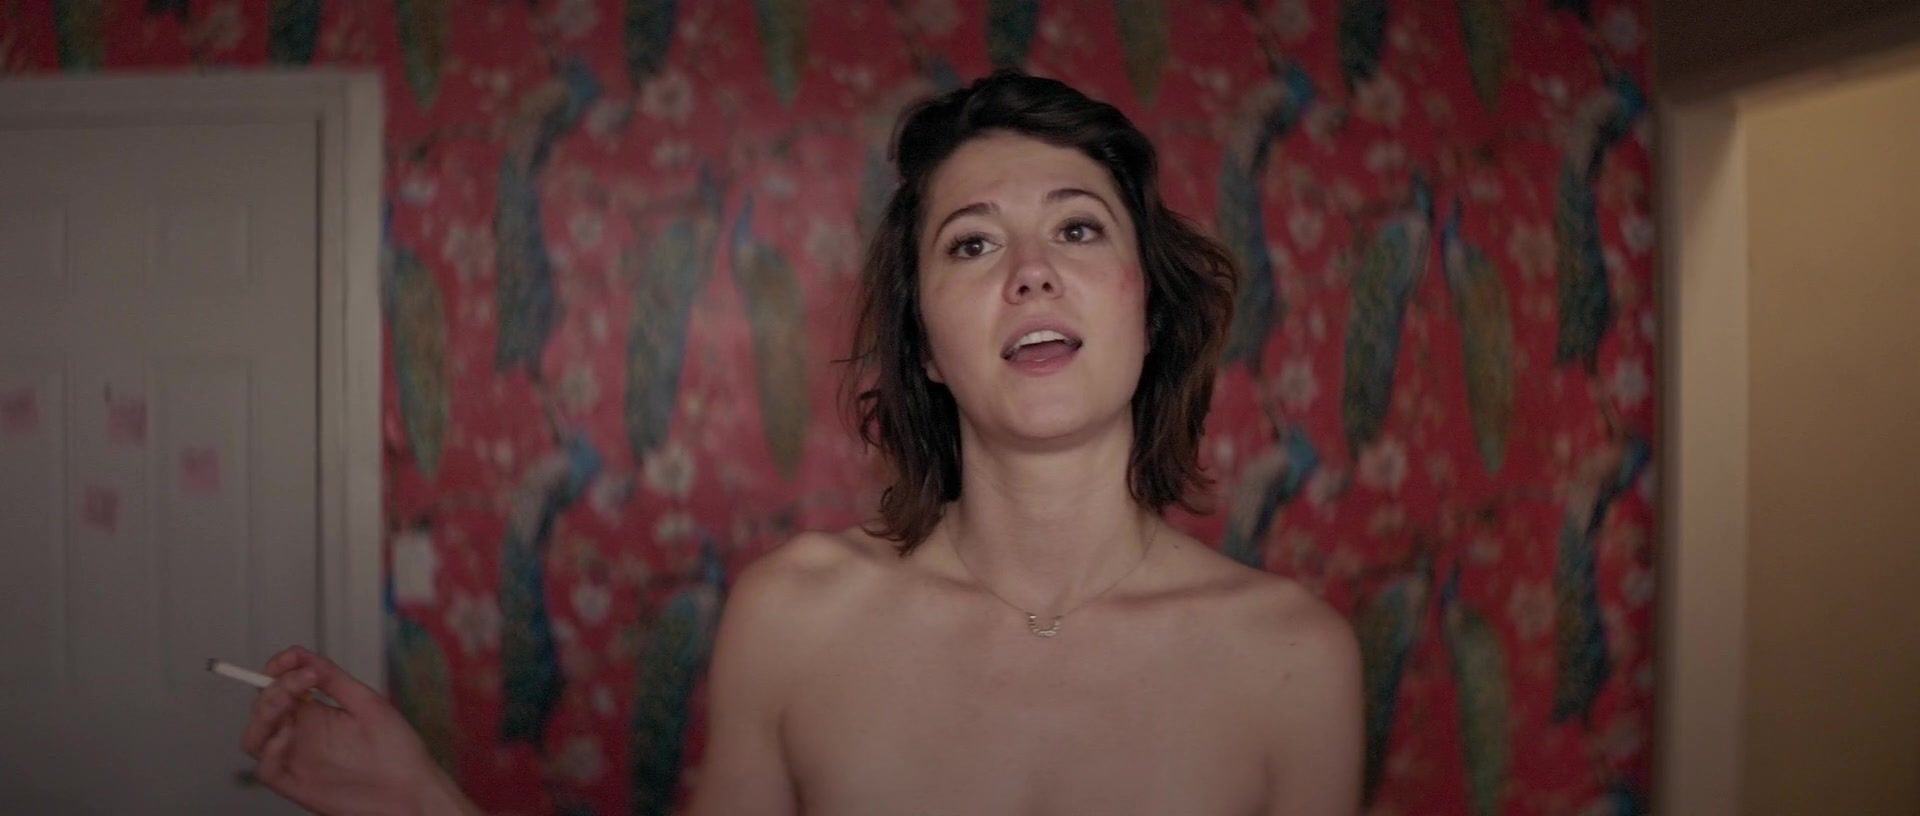 Nxgx Mary Elizabeth Winstead nude - All About Nina (2018) Party - 2